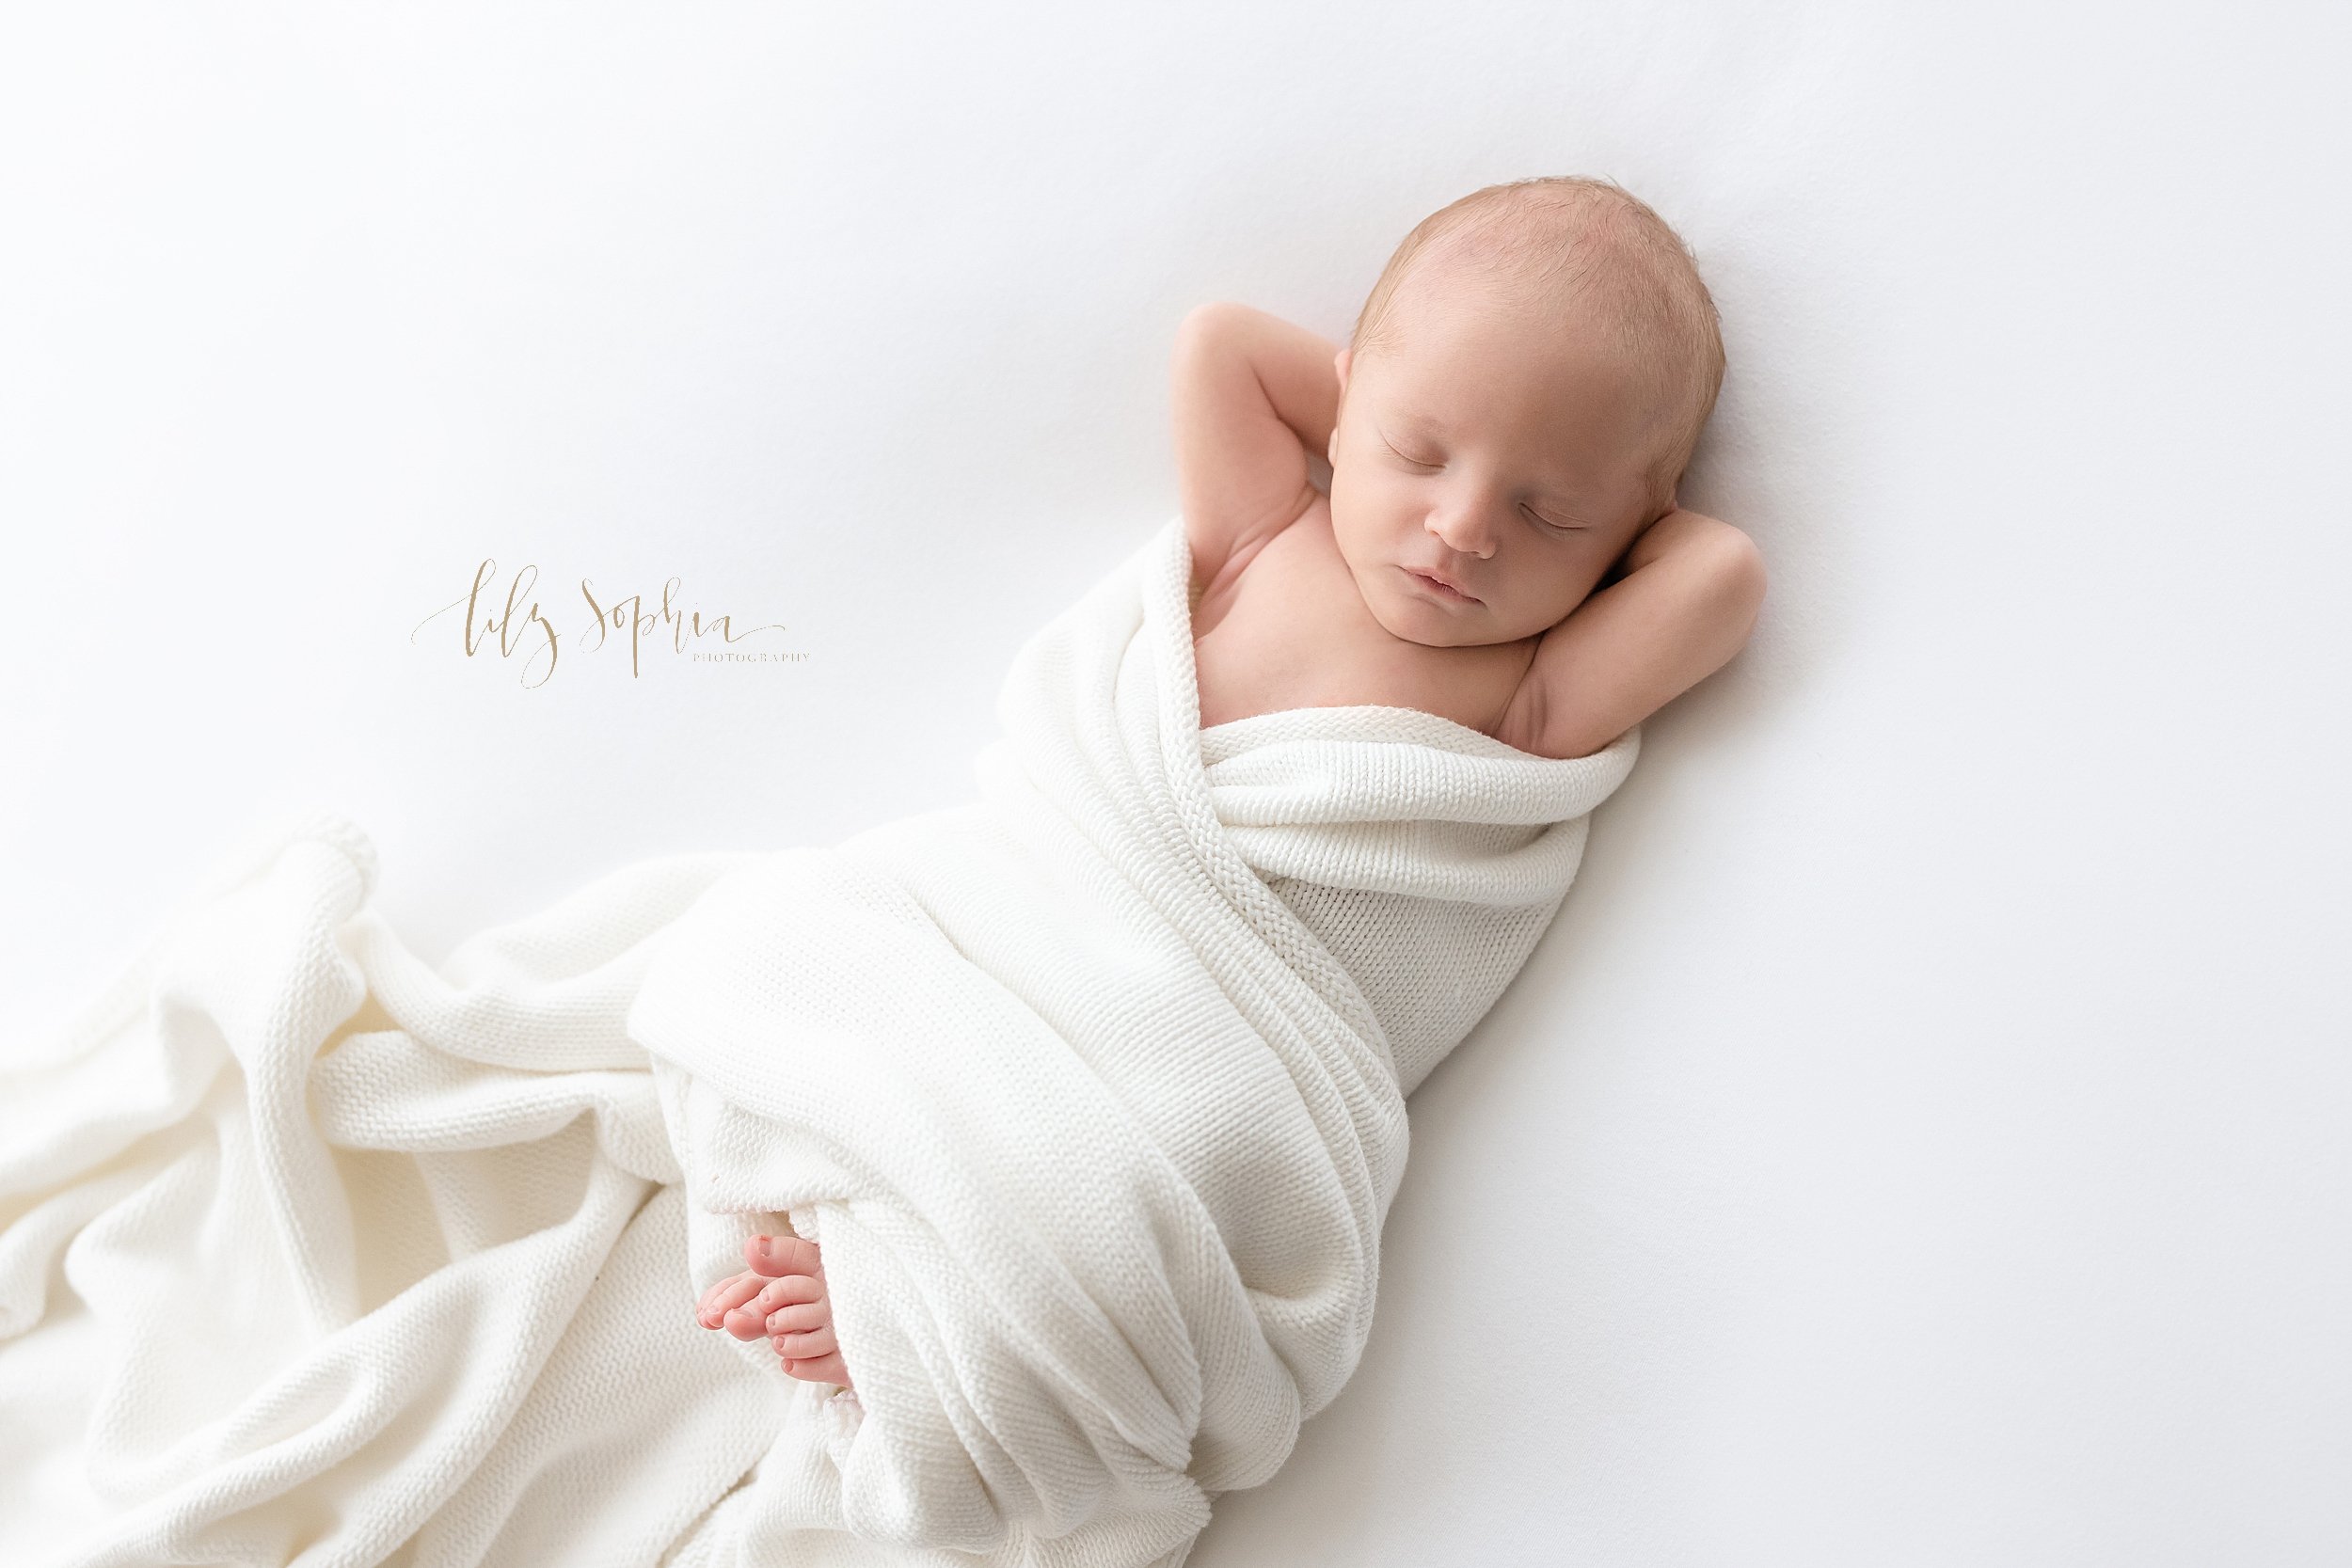  Newborn photo session of an infant boy as he lies on his back with his hands behind his head peacefully sleeping as a soft white blanket crisscrosses across his boy with his toes peeking out taken in a natural light studio near Virginia Highlands in